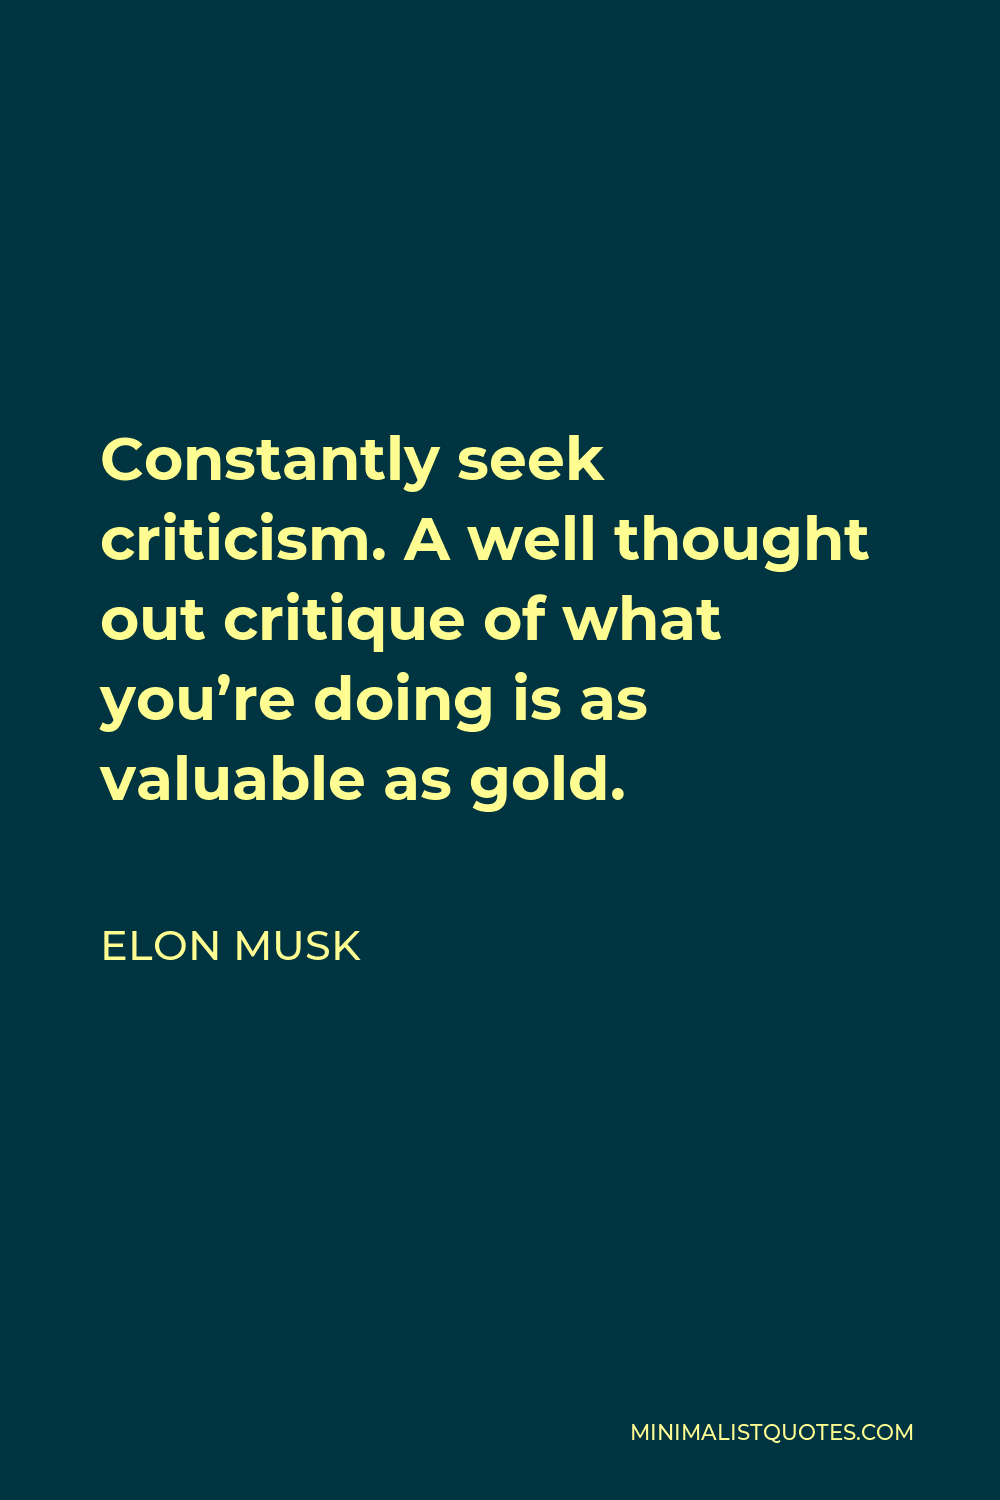 Elon Musk Quote - Constantly seek criticism. A well thought out critique of what you’re doing is as valuable as gold.